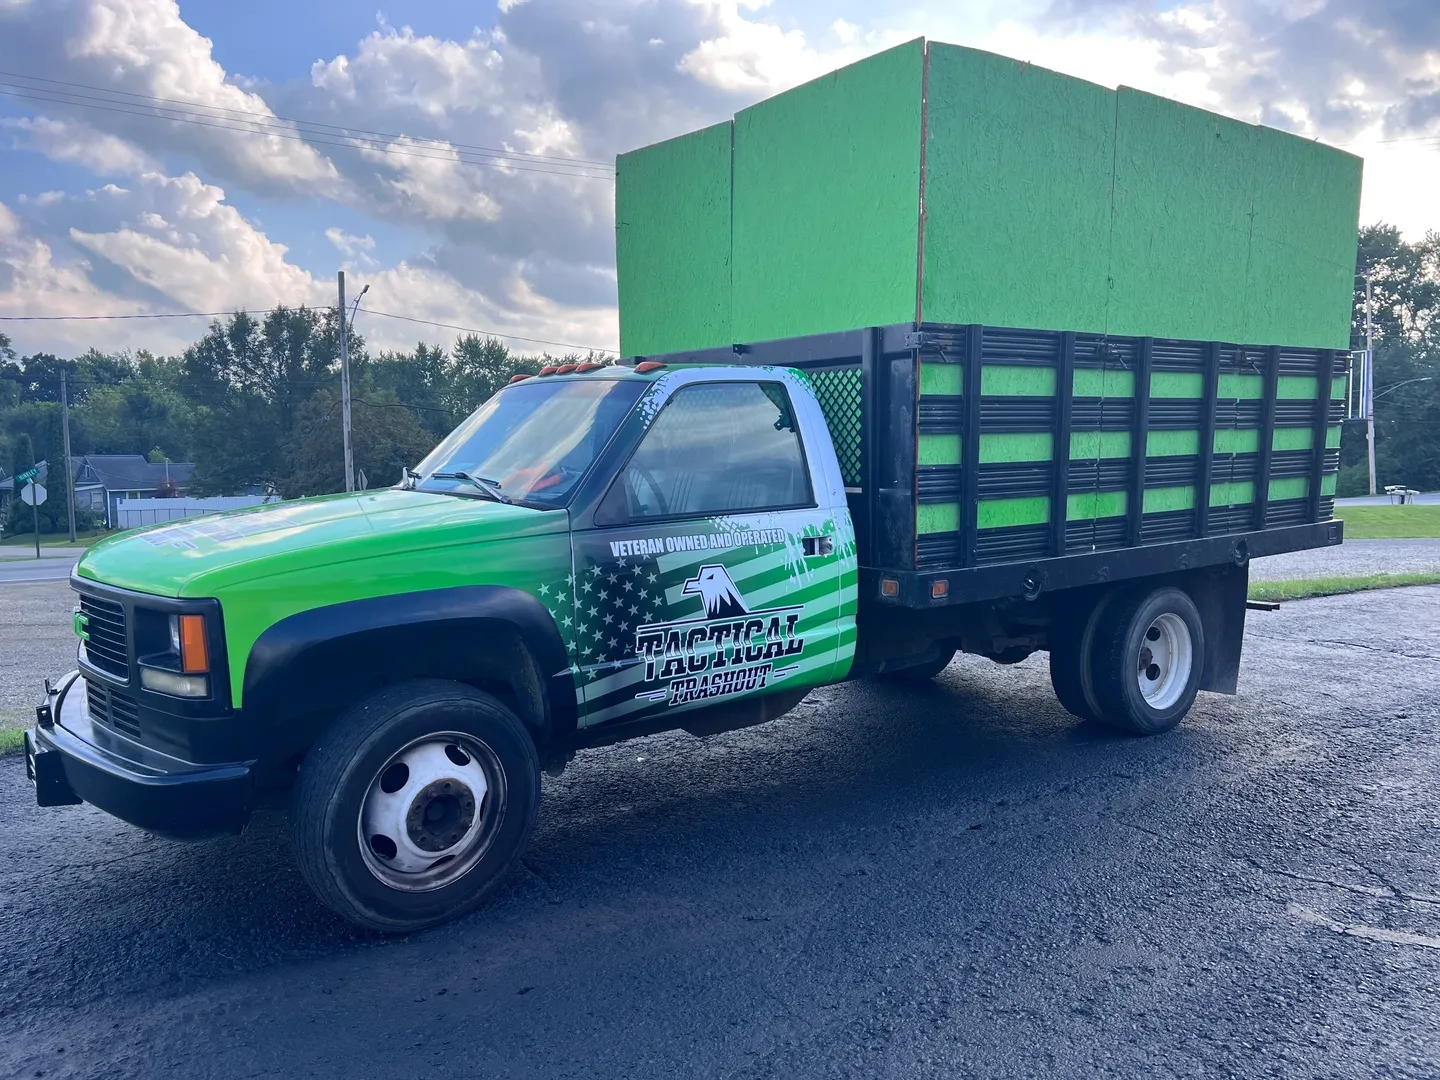 A truck with a green box on the back of it.